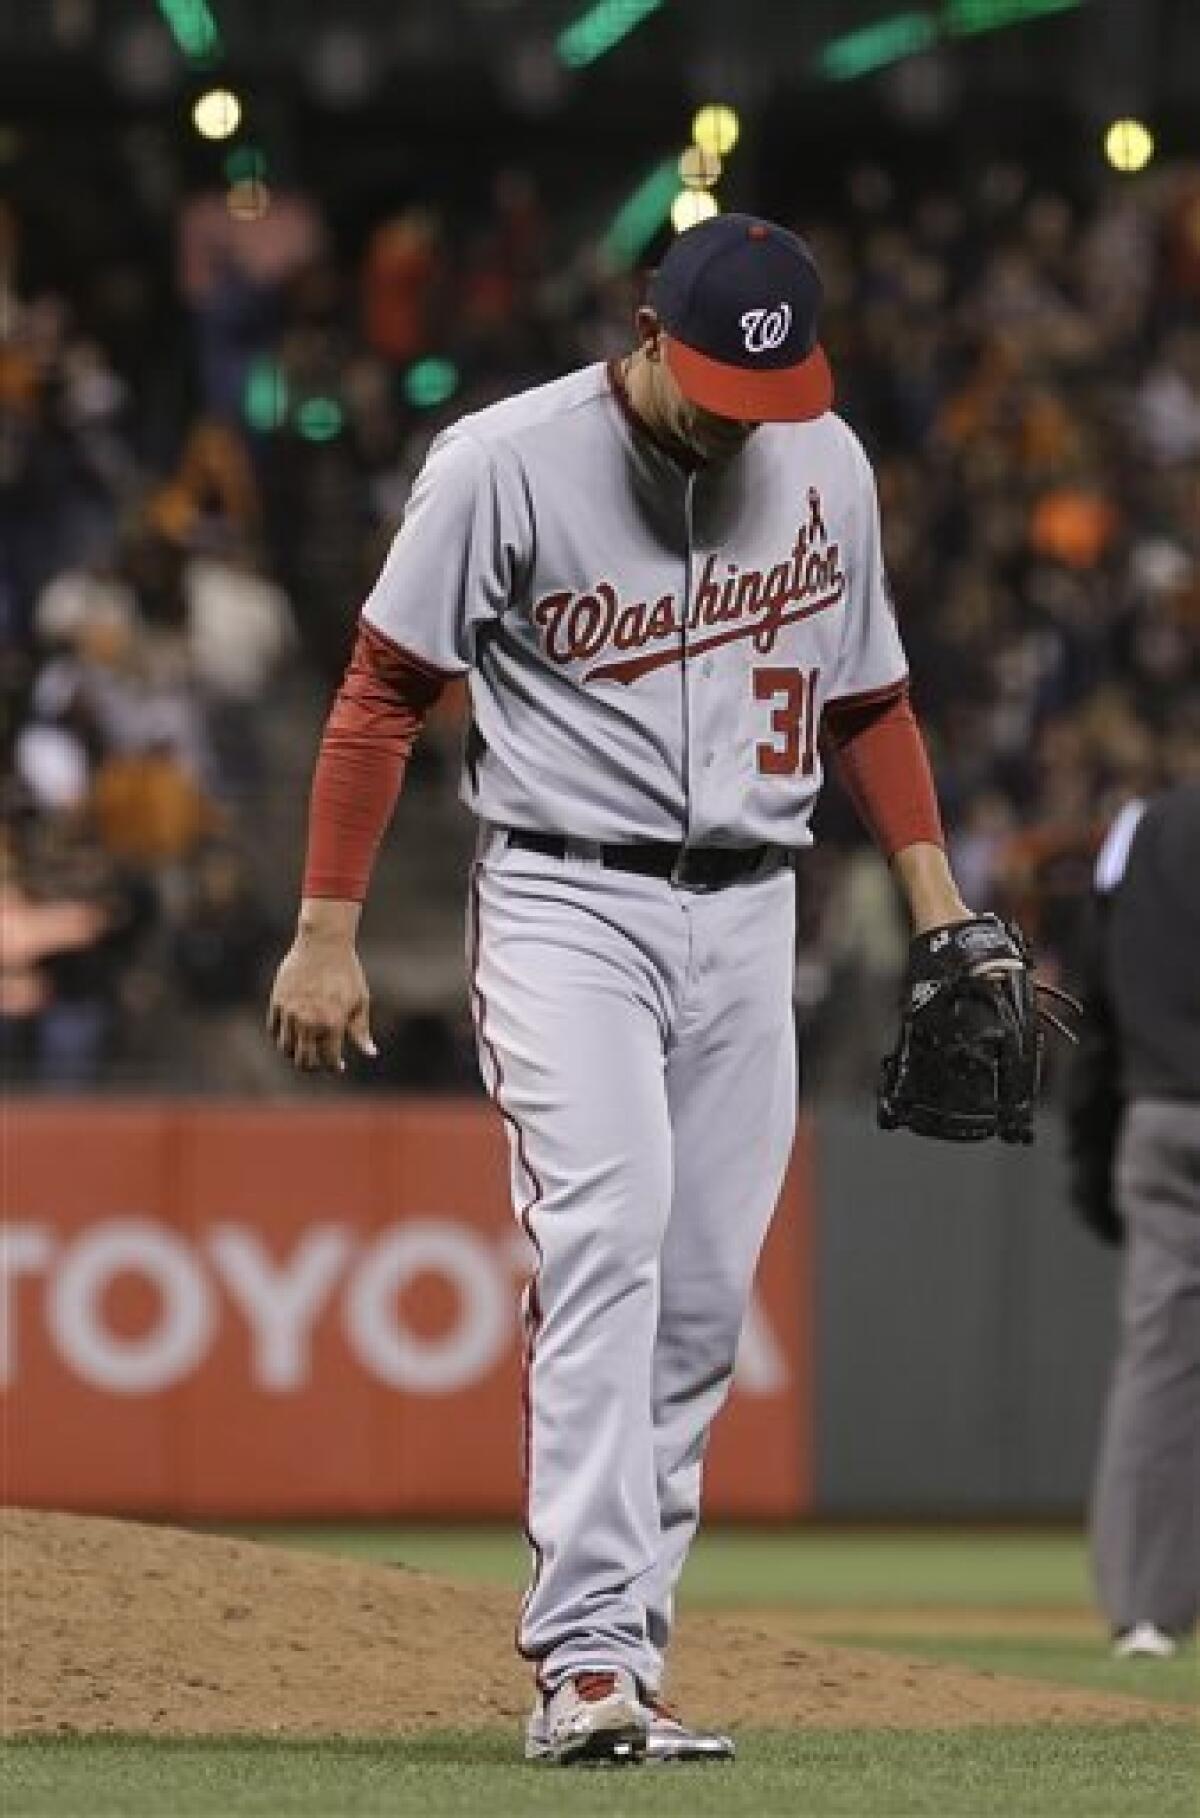 Nats collapse late, lose 4-2 to Giants in 10th - The San Diego Union-Tribune